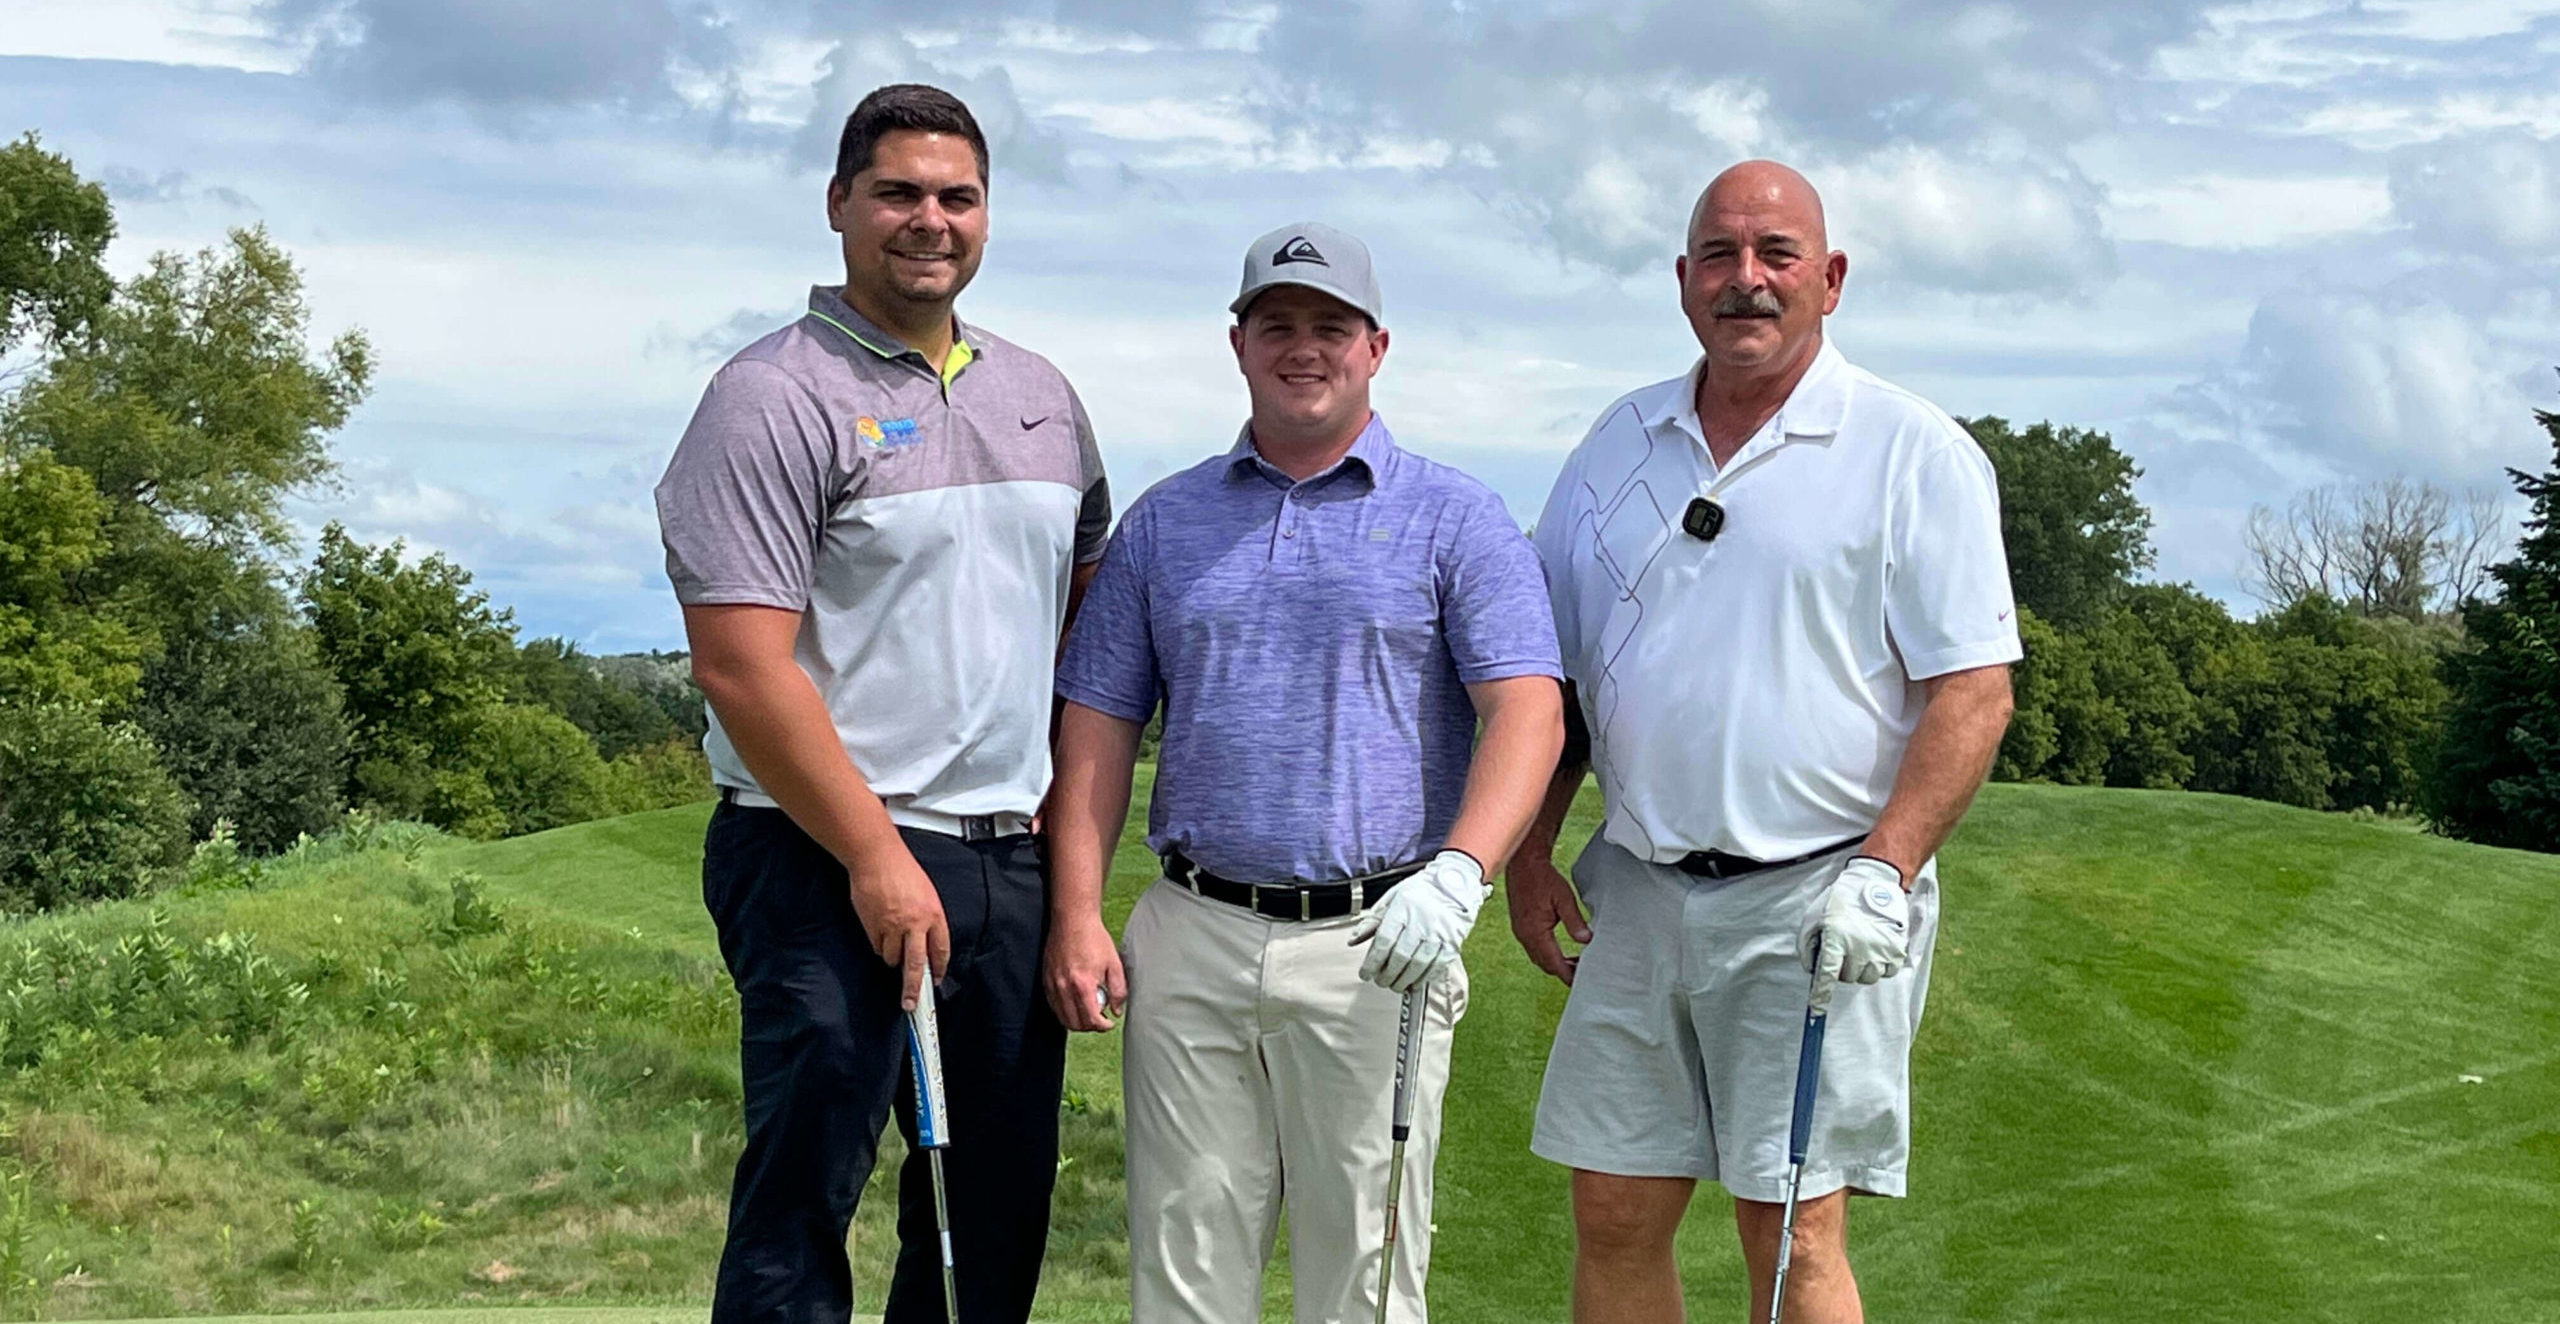 DePue Mechanical Participates in JakeFest Annual Charity Event